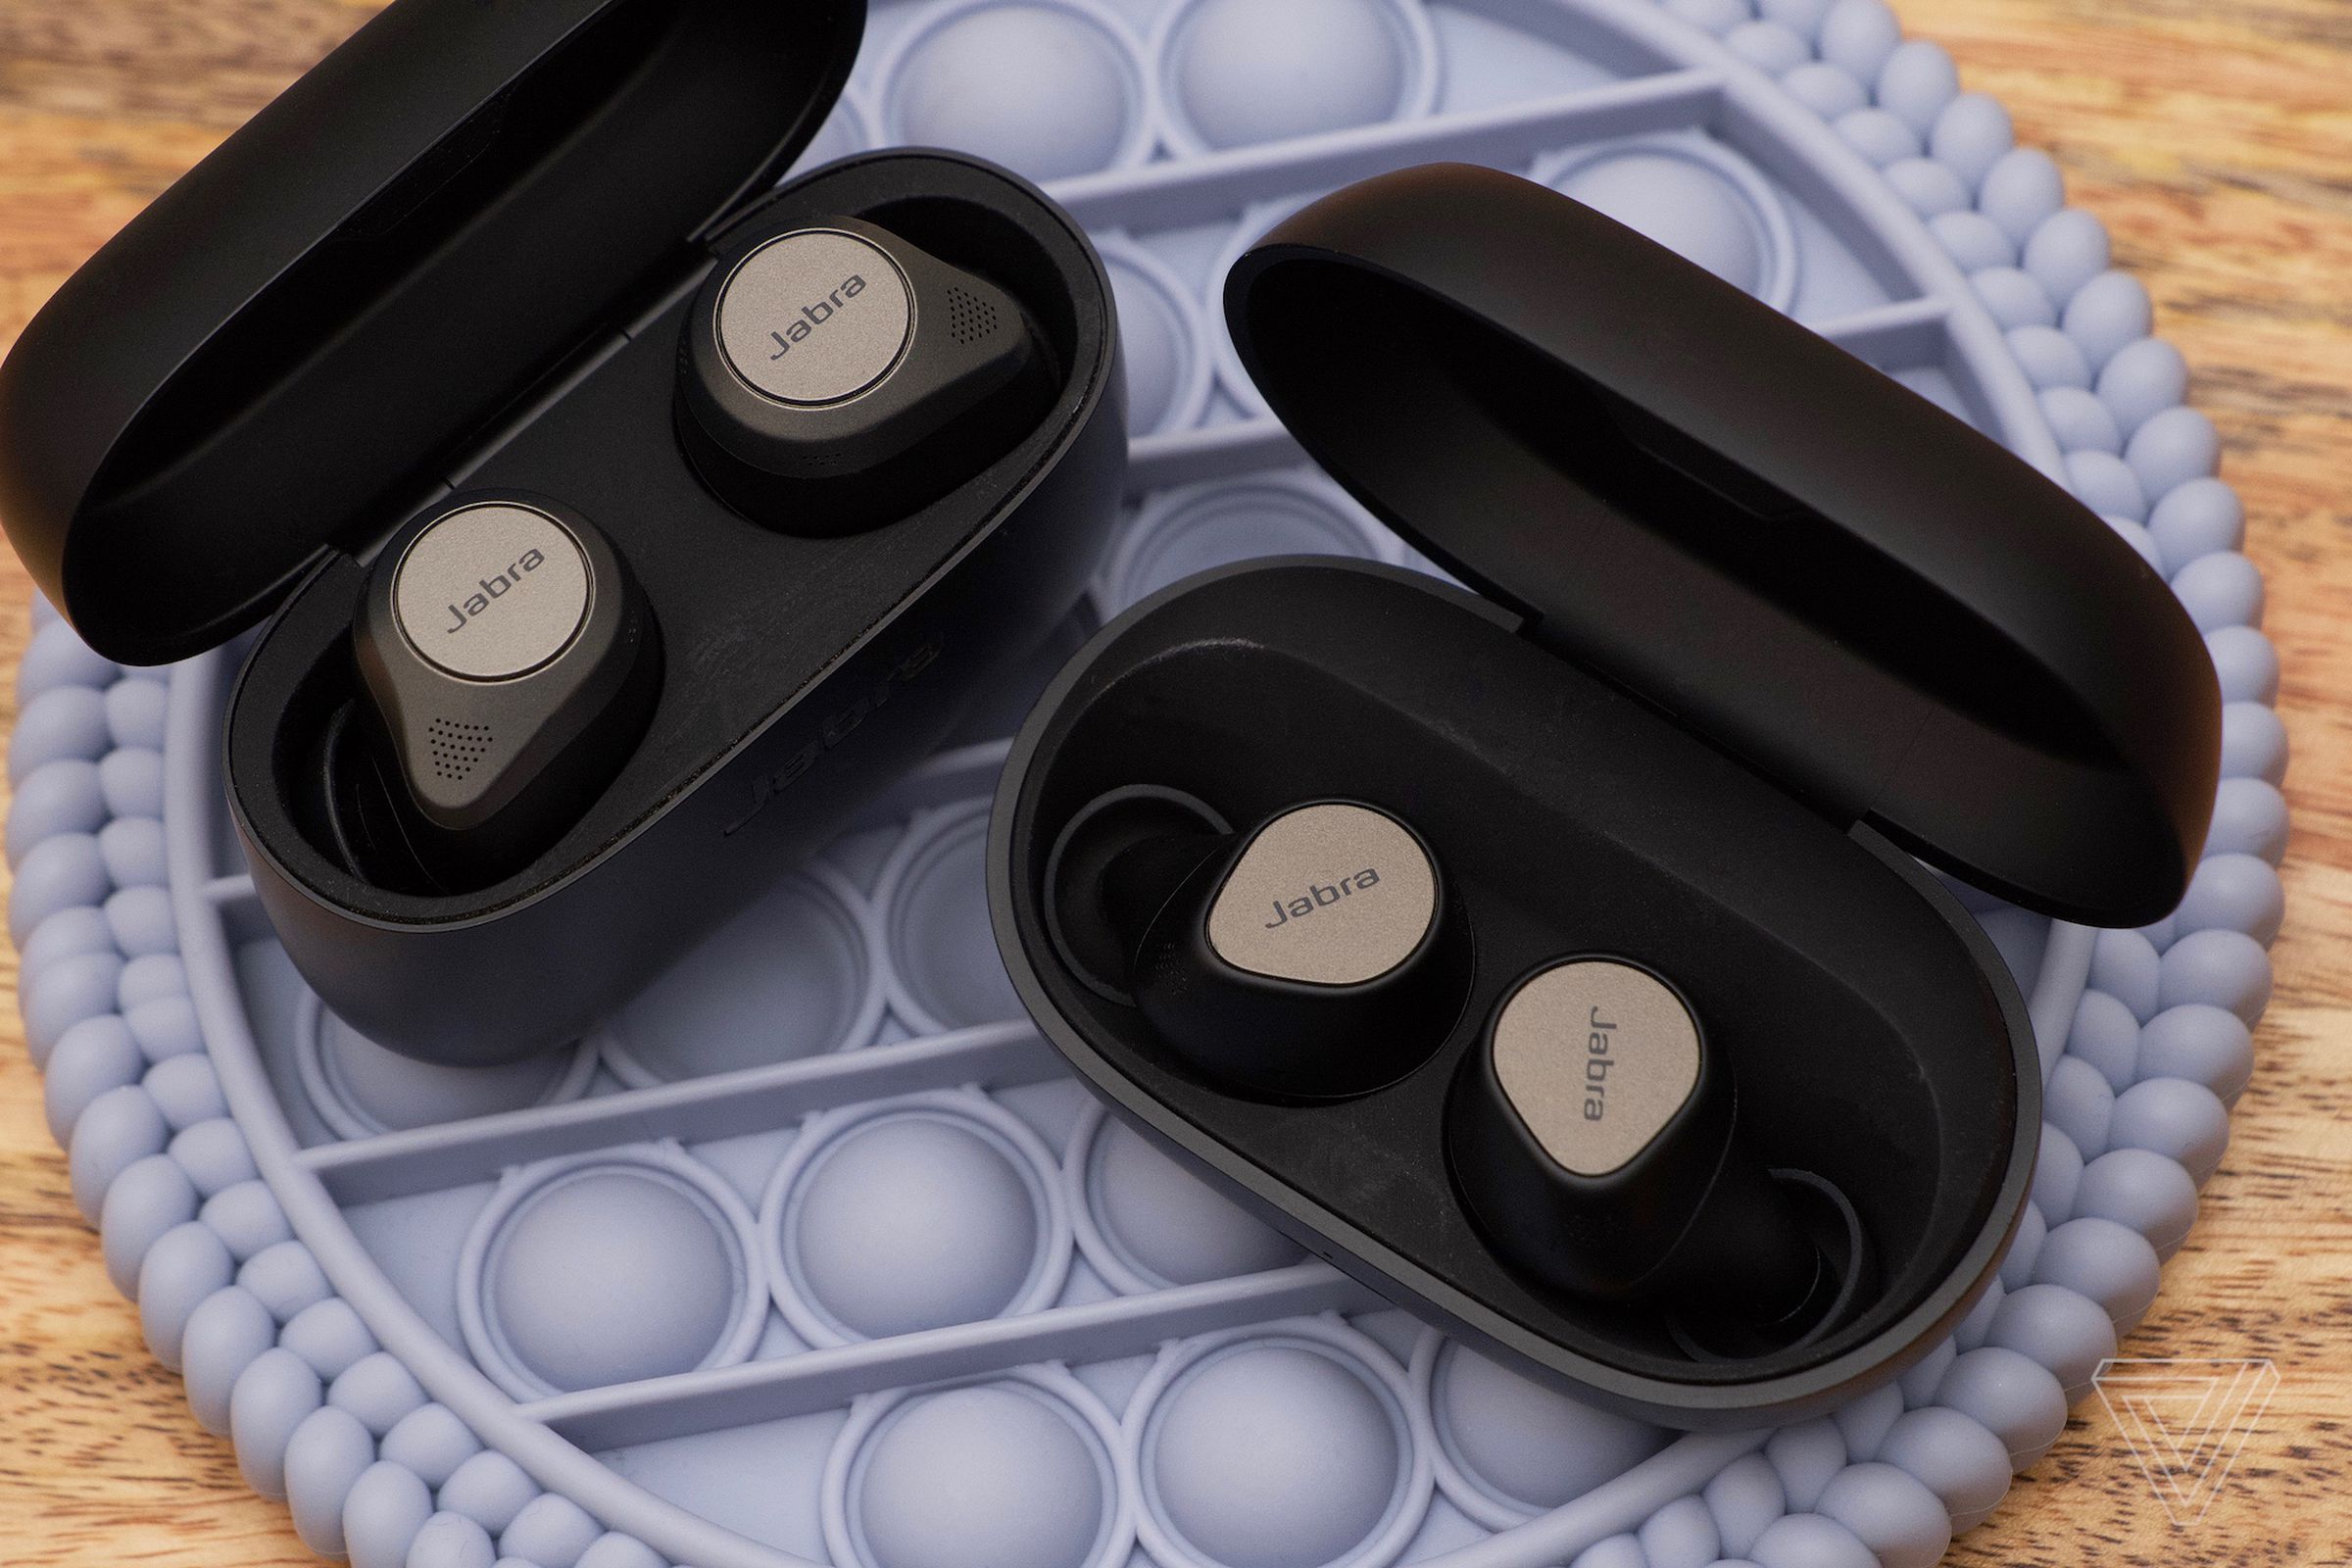 The new earbuds have a sleeker design than Jabra’s past efforts.